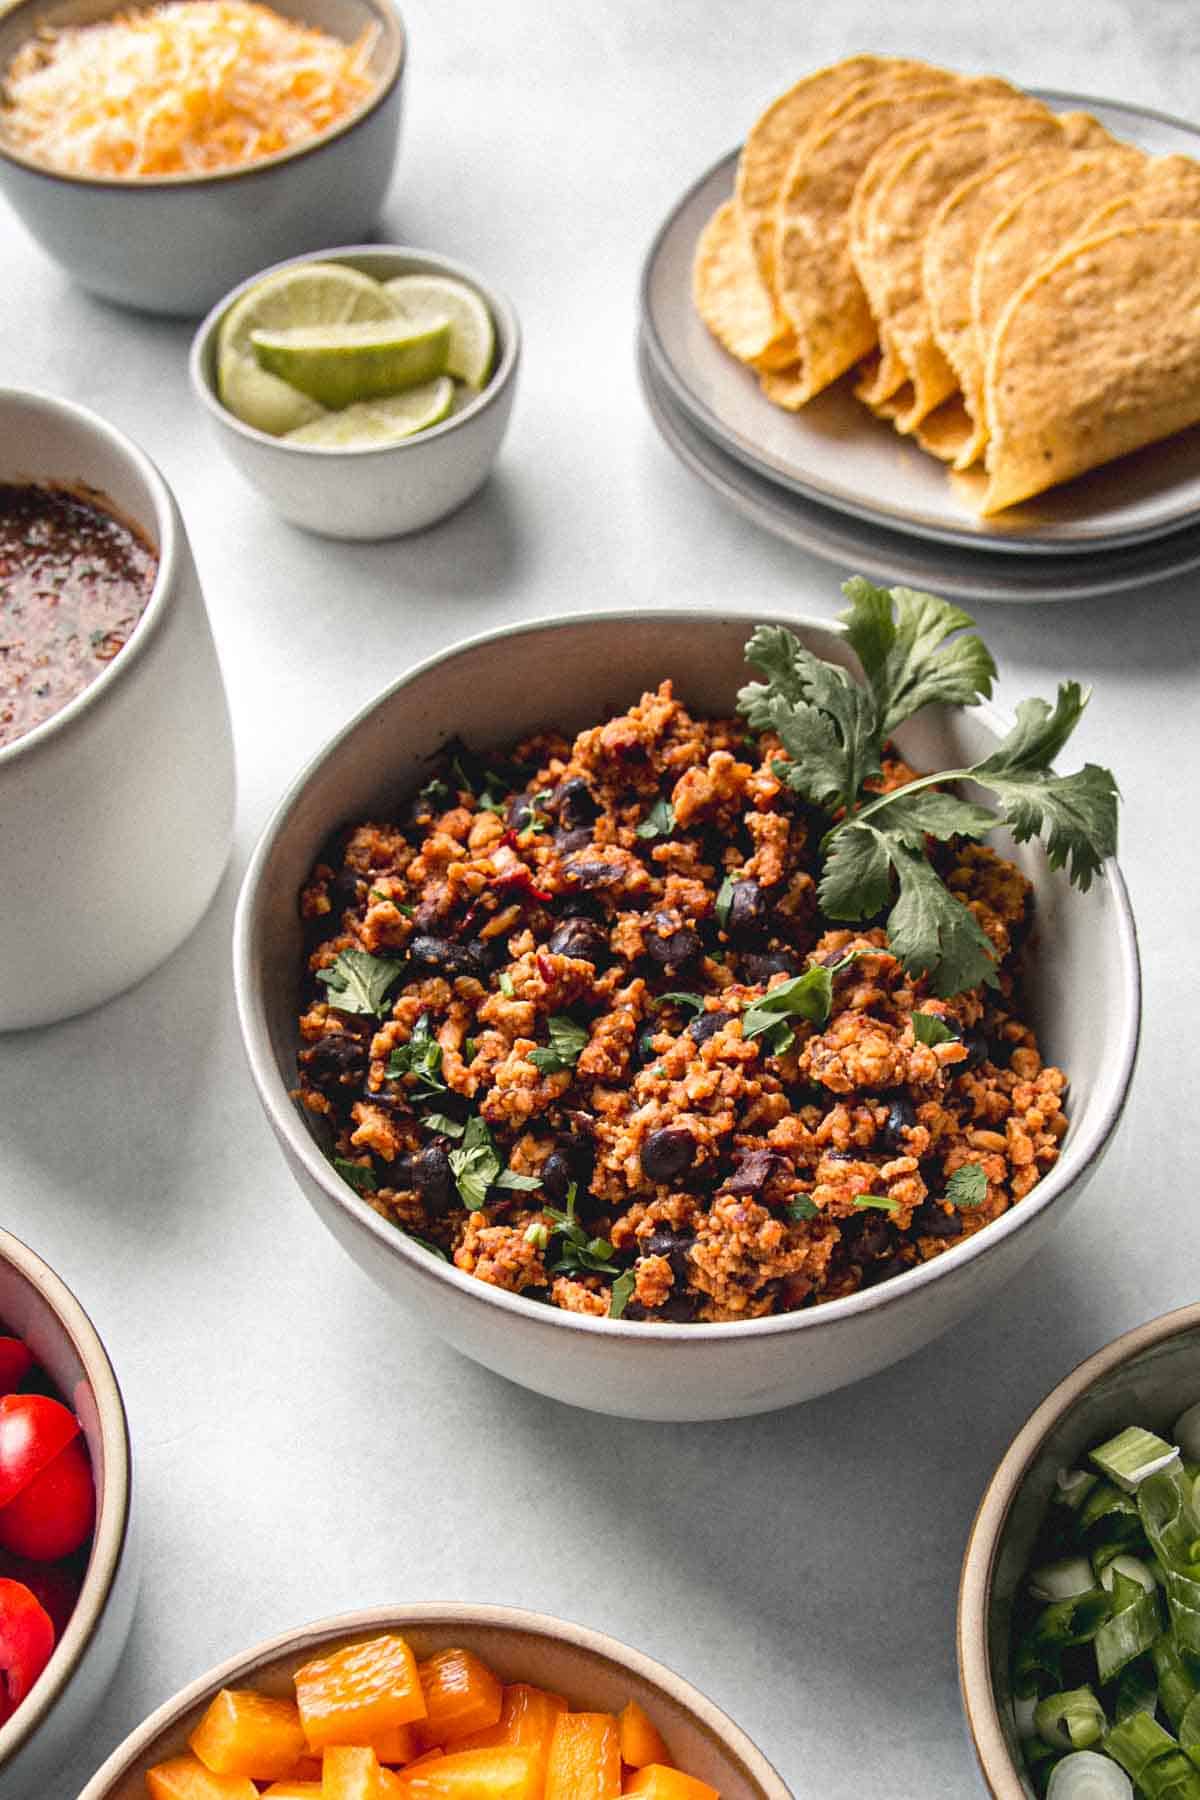 Ground chicken taco meat in a bowl topped with cilantro and surrounded by bowls of taco fixings.